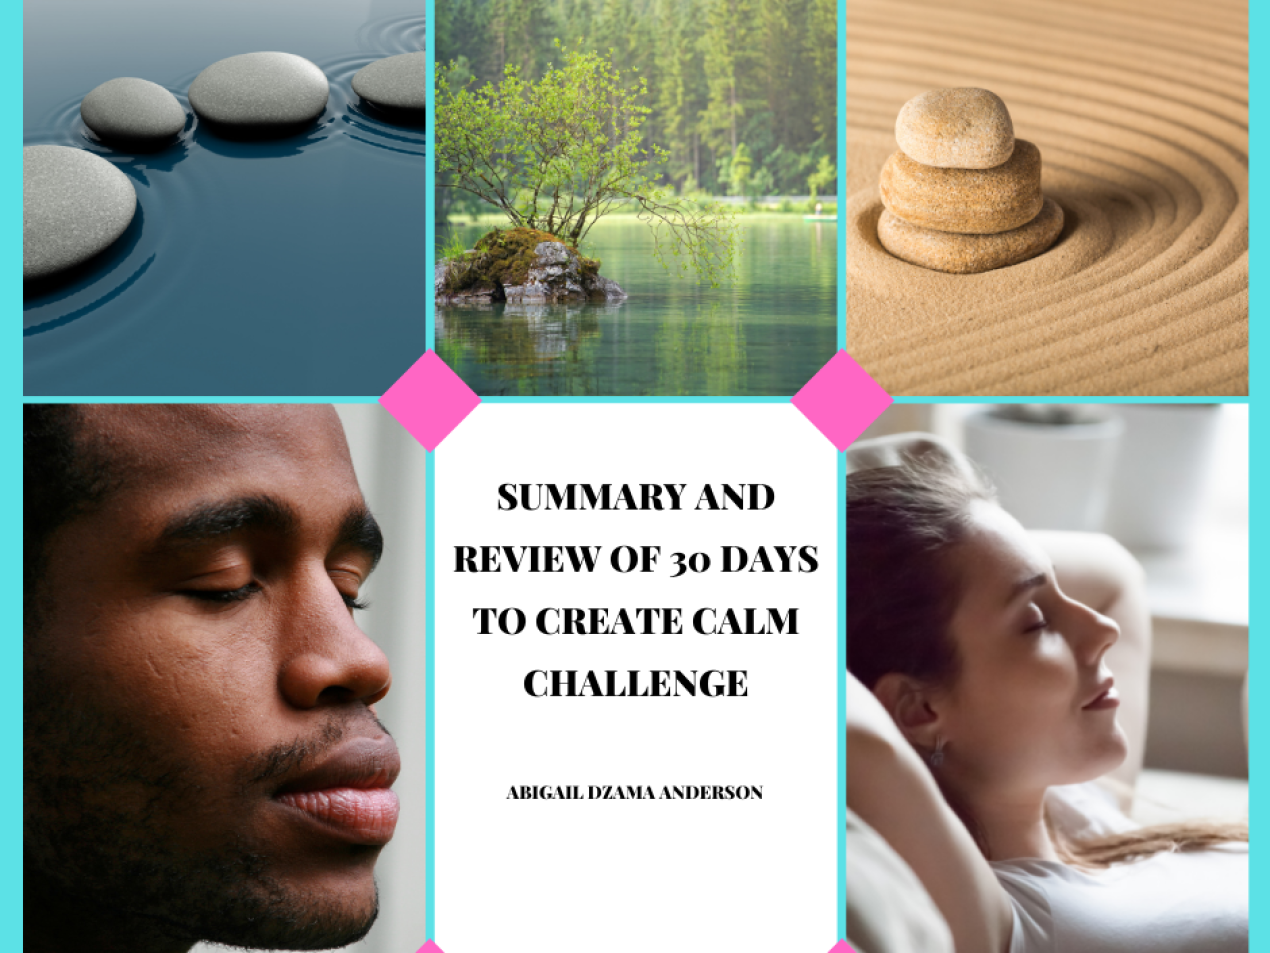 Summary and Review of 30 Days to Create Calm Challenge